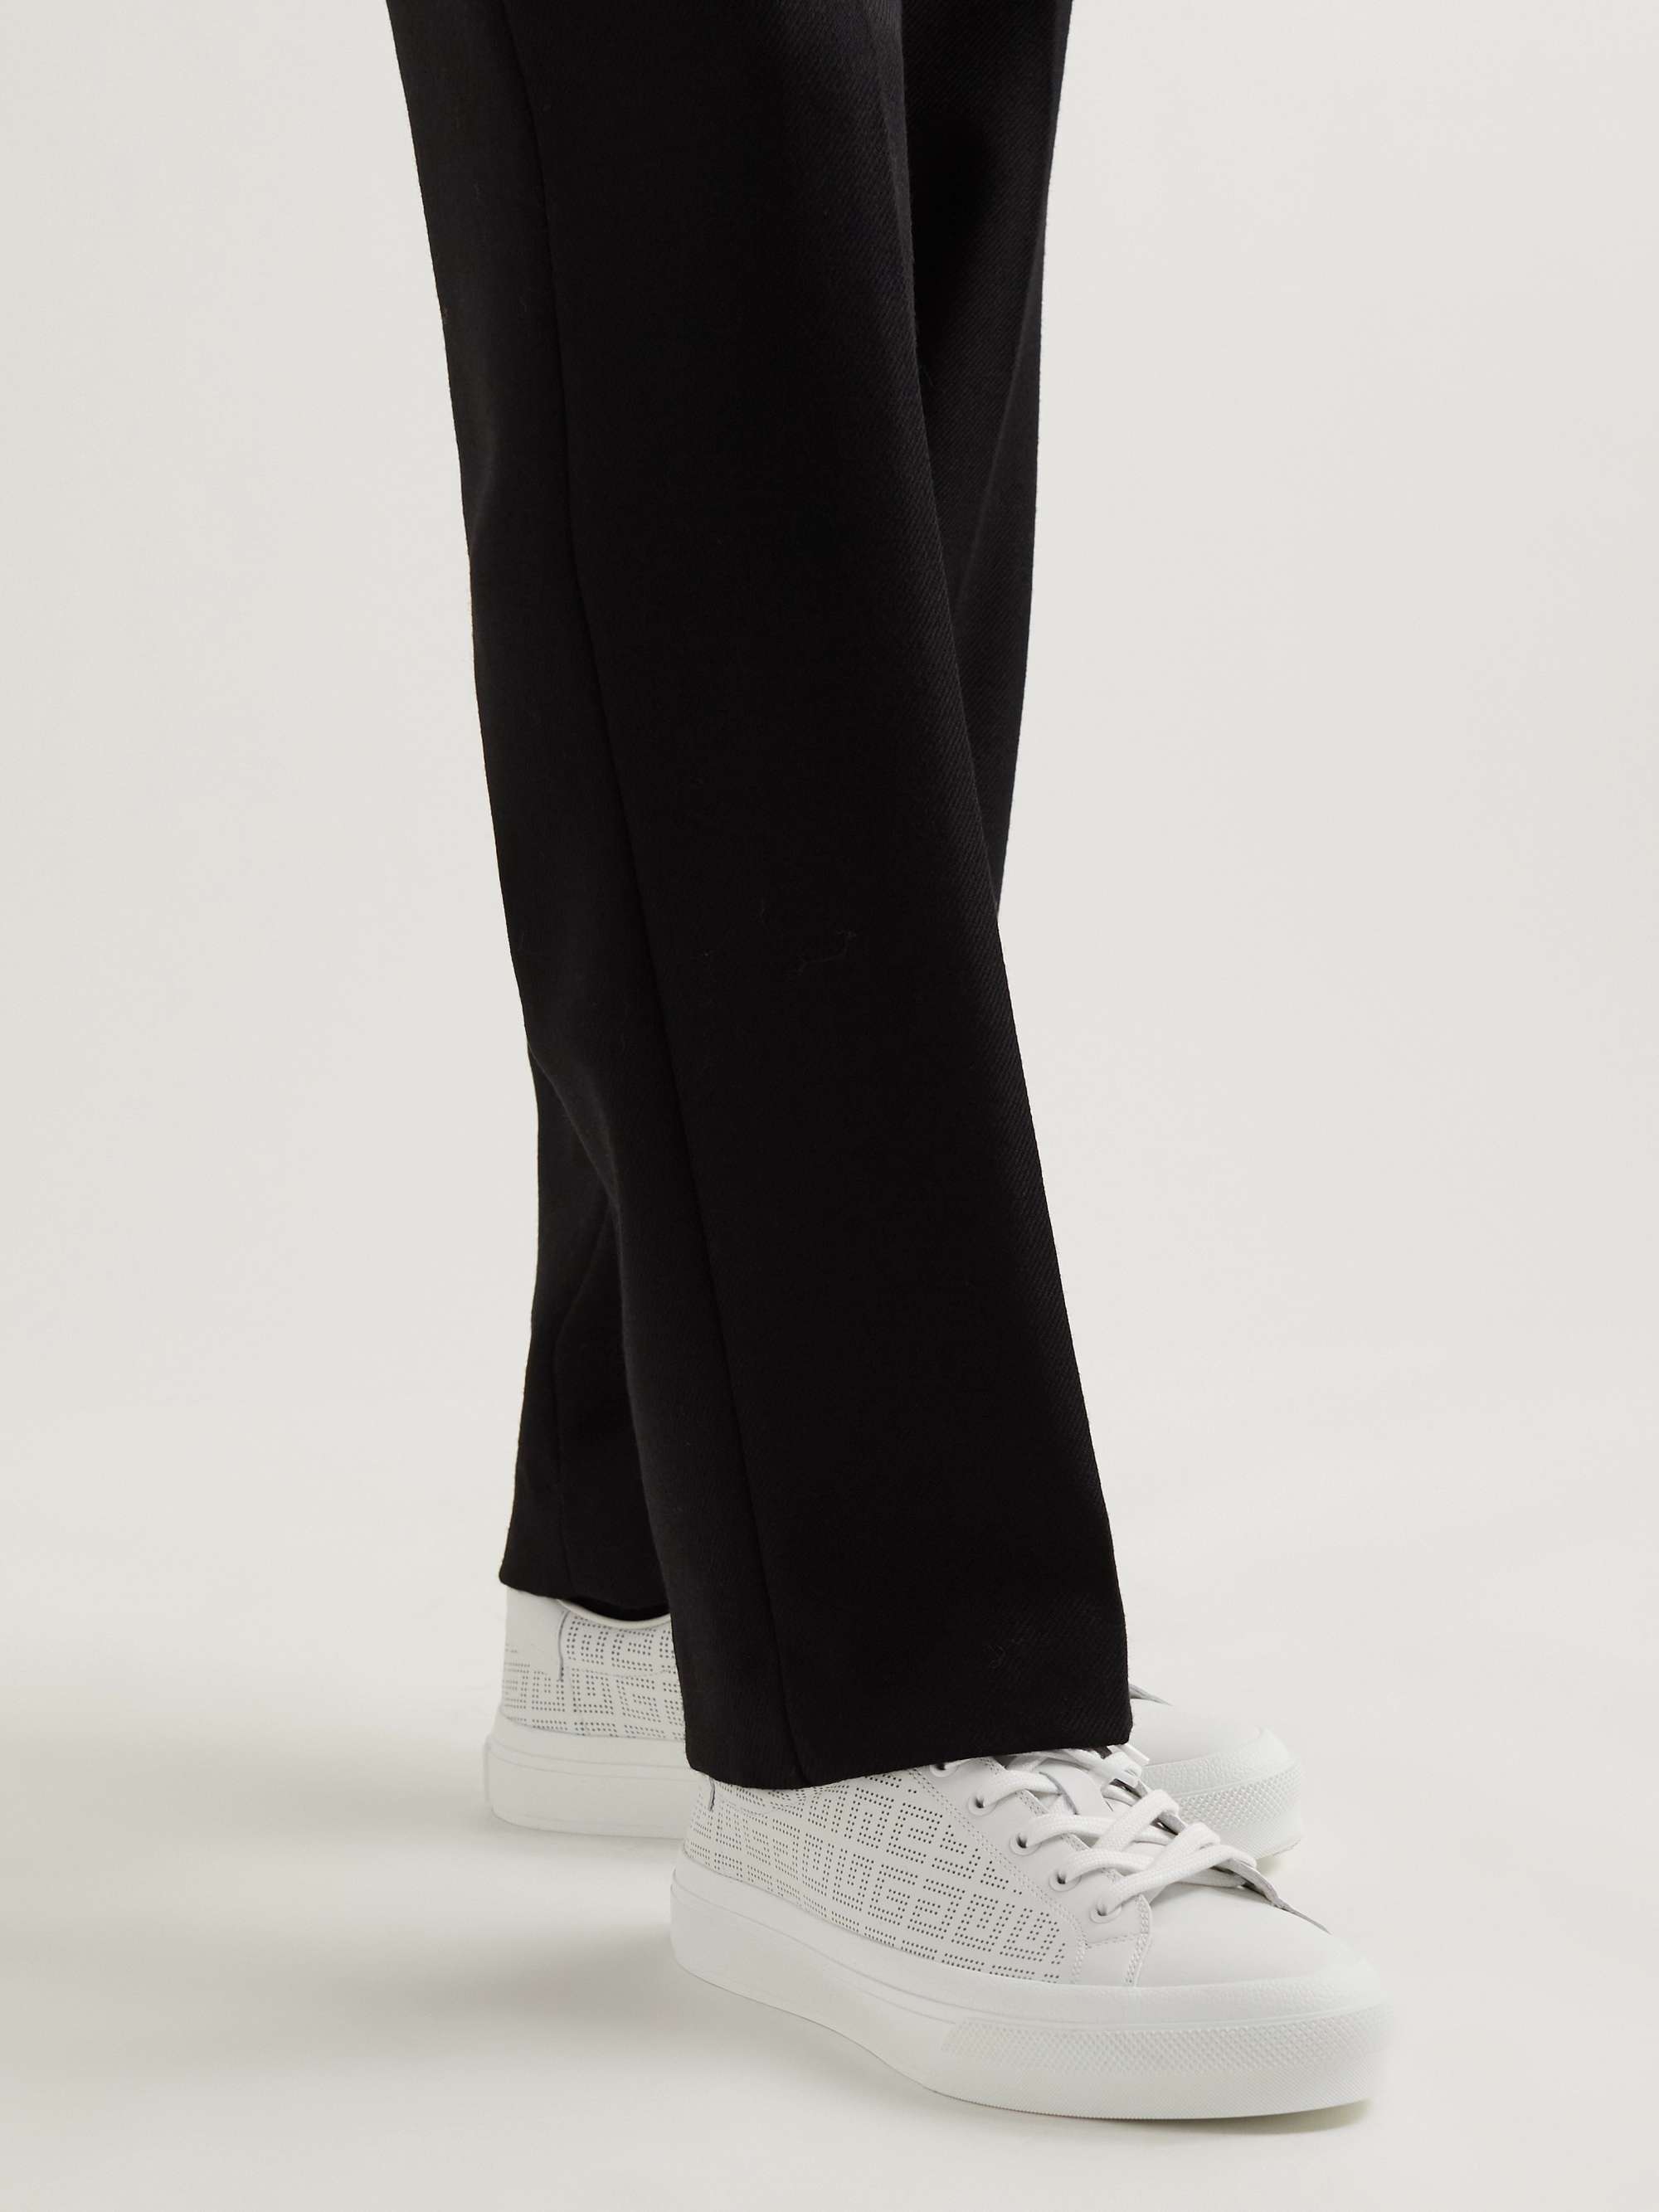 GIVENCHY Perforated Leather Sneakers